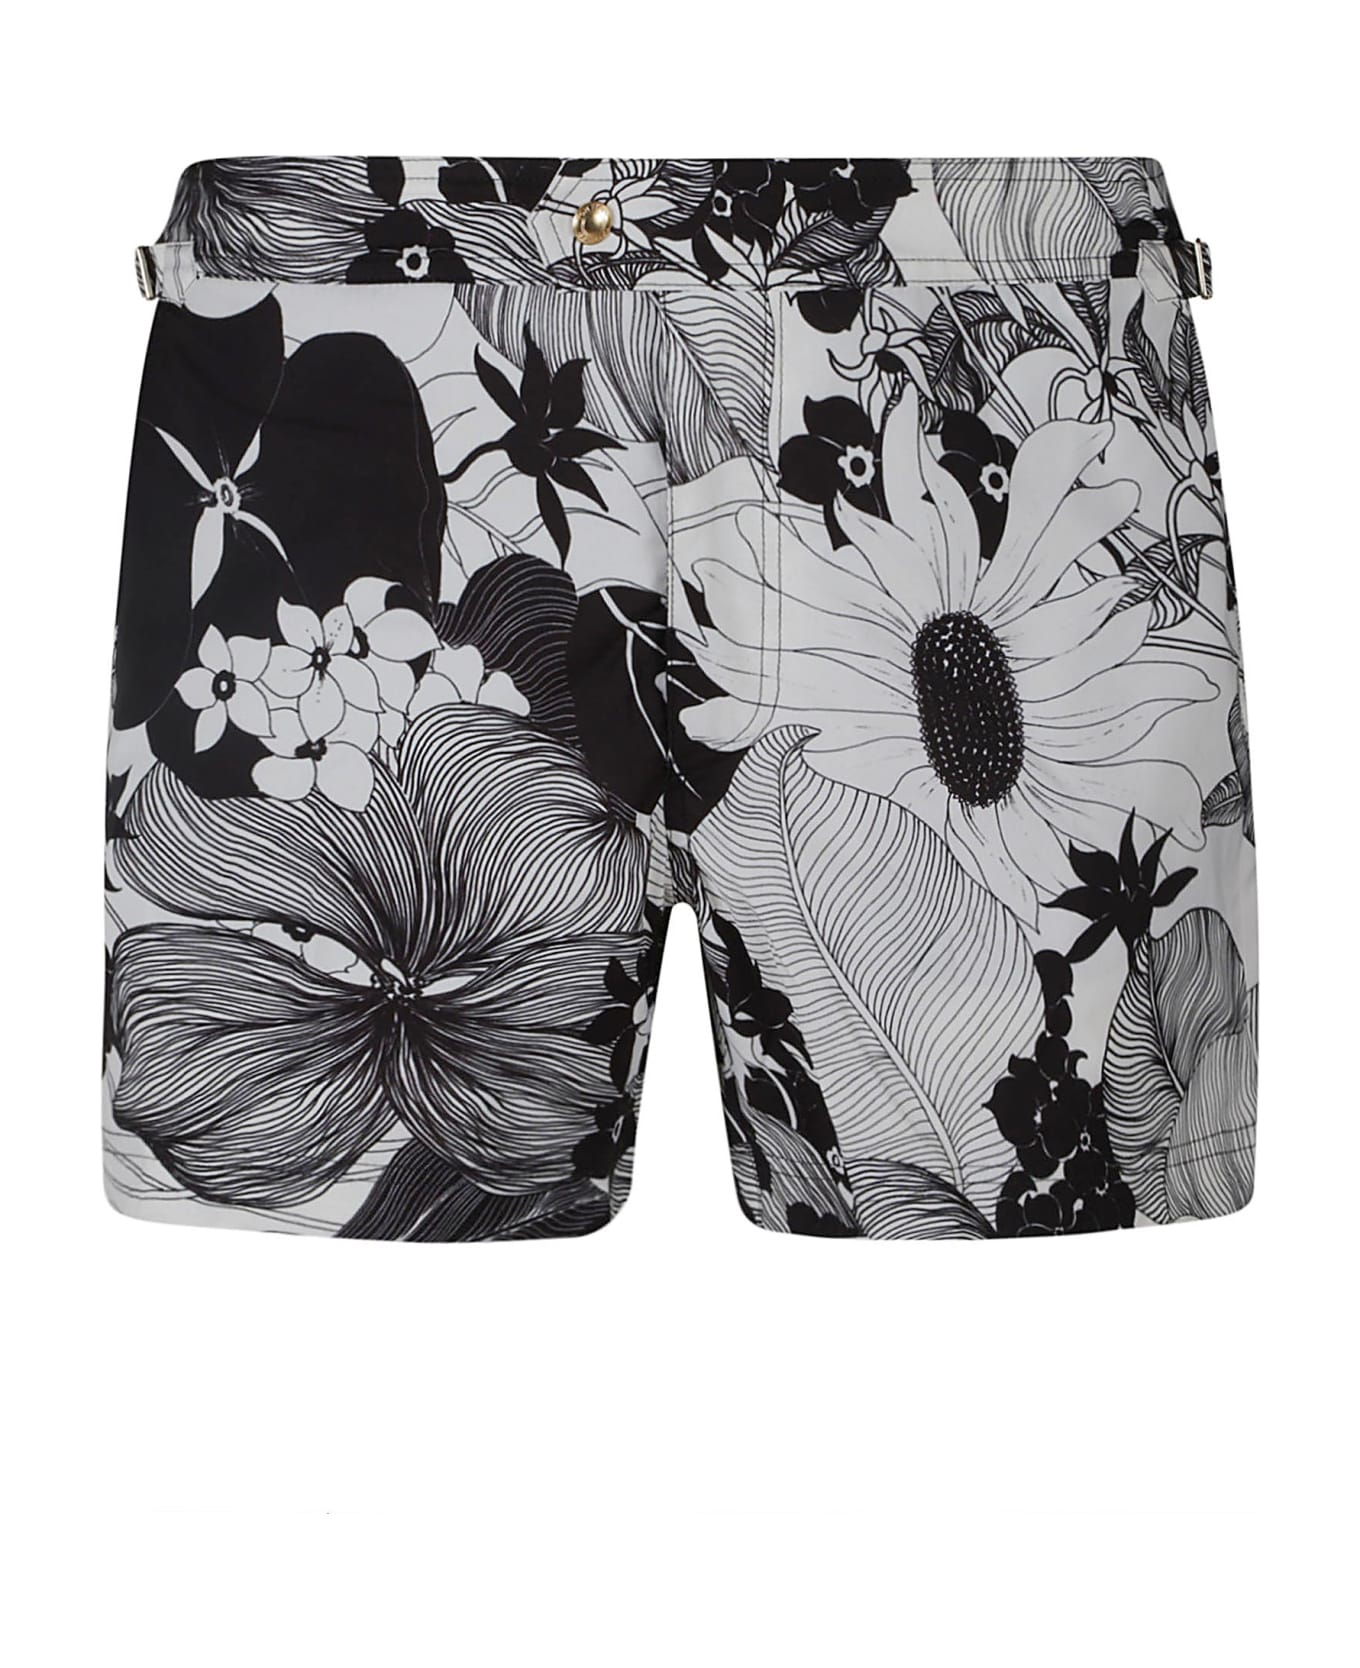 Tom Ford Floral Printed Shorts - Combo Black ショートパンツ